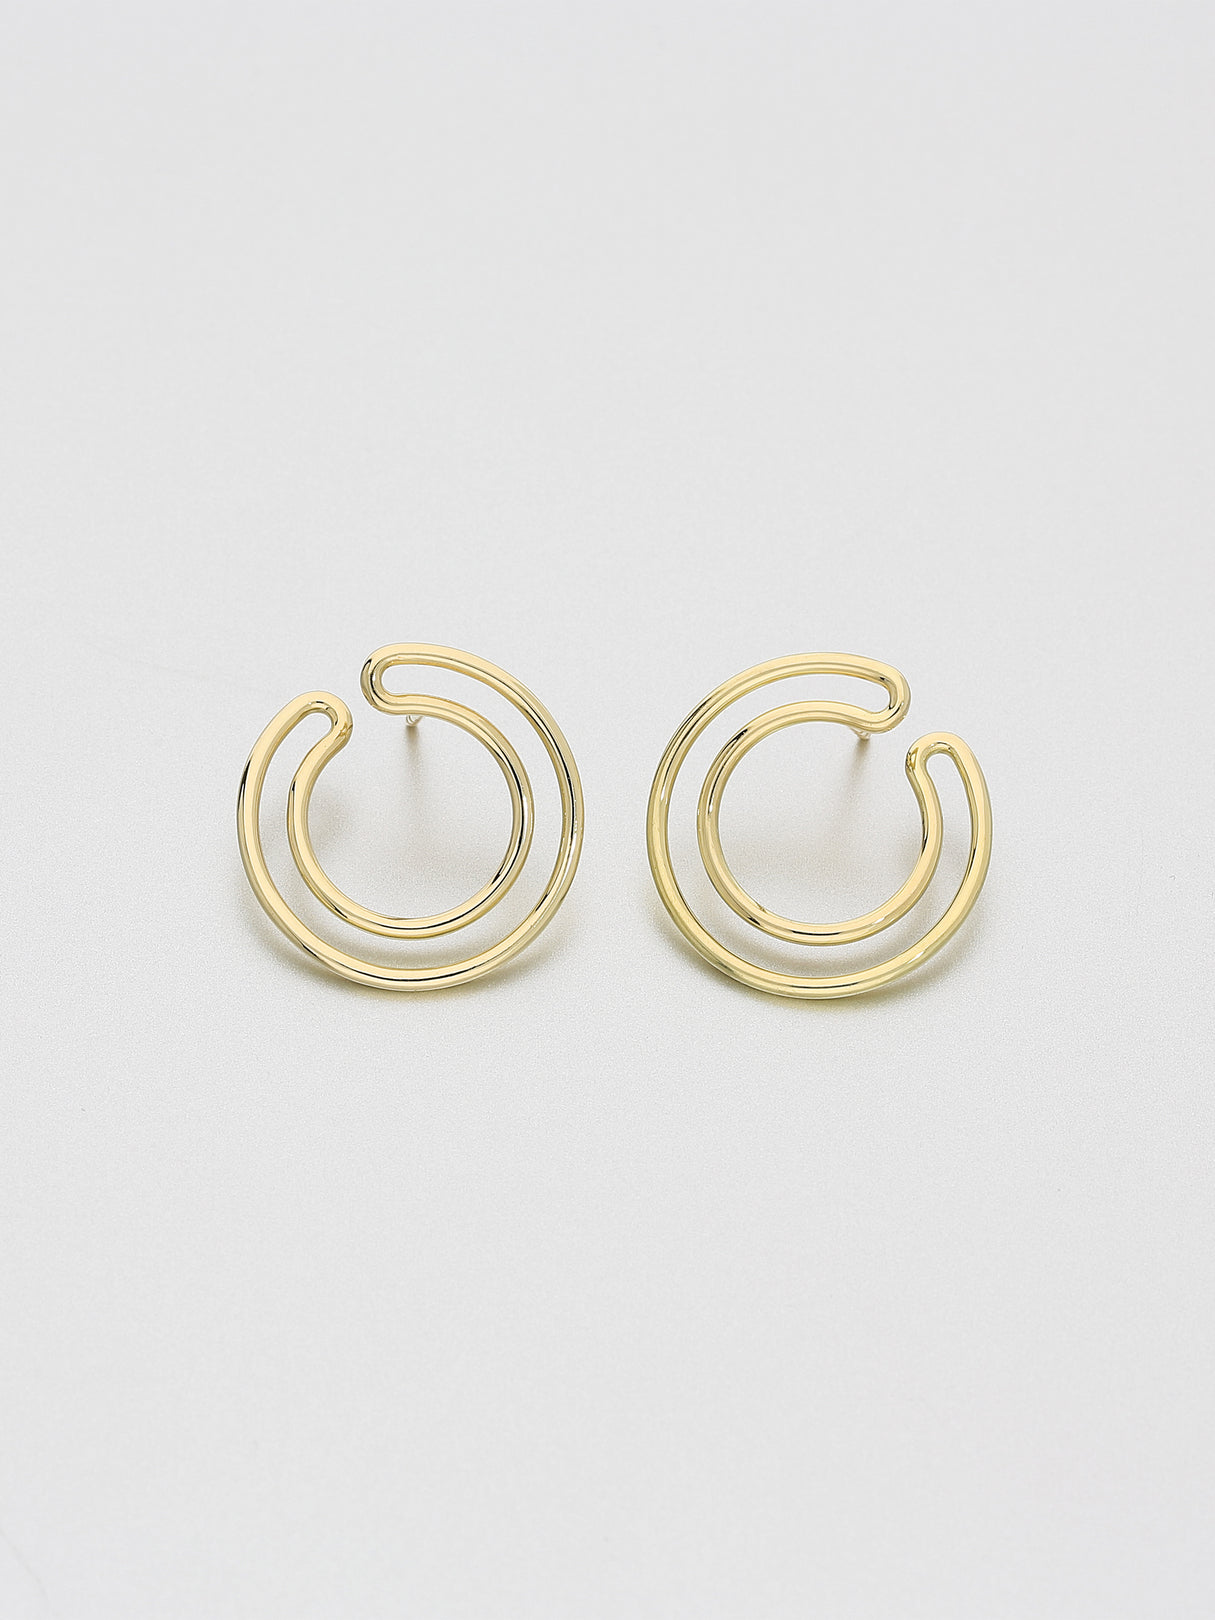 Cirque Earrings Small, Yellow gold